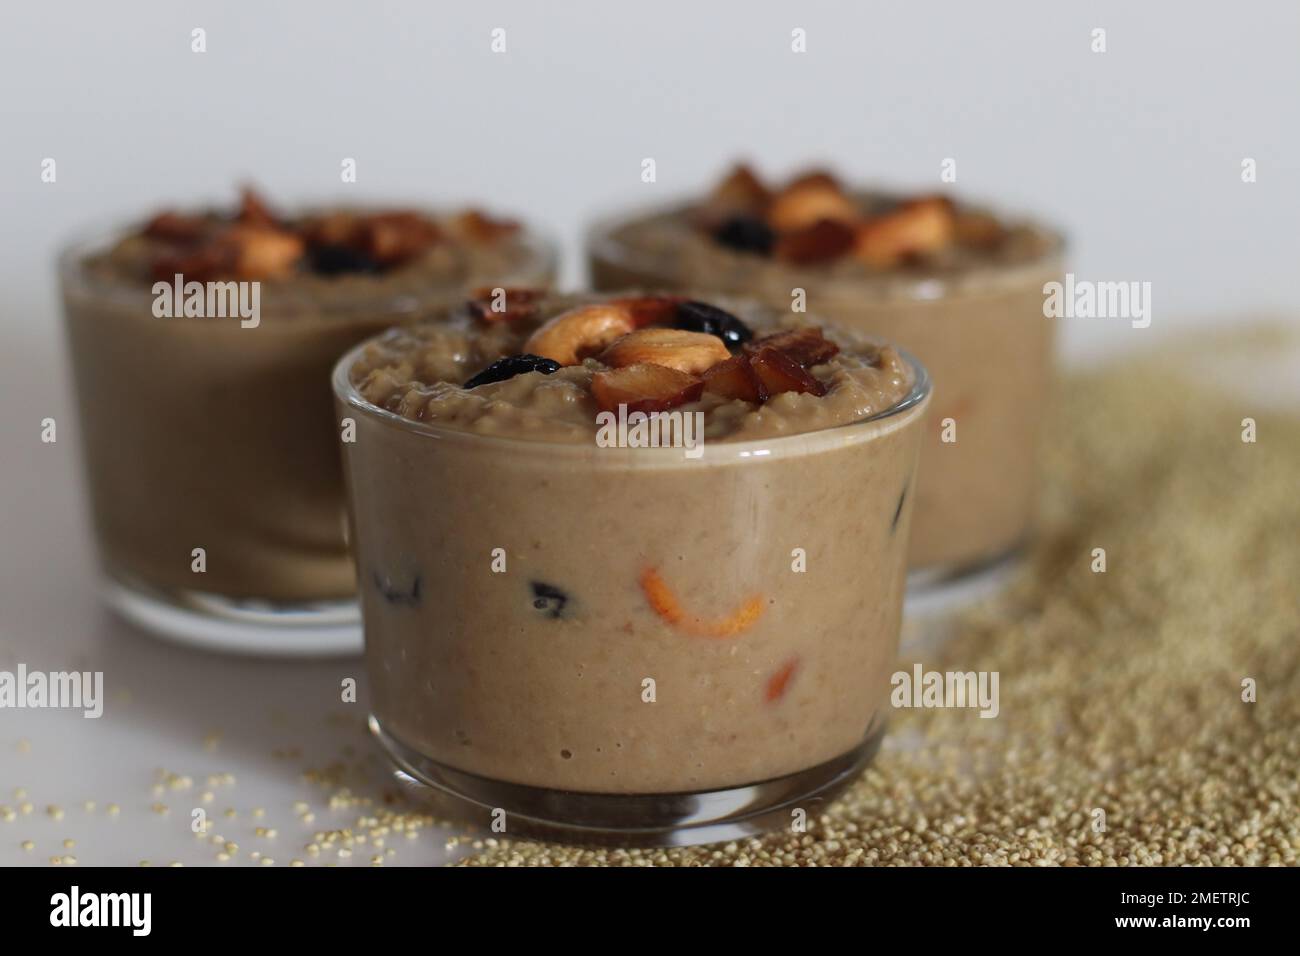 Brown top millet payasam. Pudding or Kheer or payasam made of brown top millet, jaggery and coconut milk, flavored with cardamom. Topped with raisins, Stock Photo